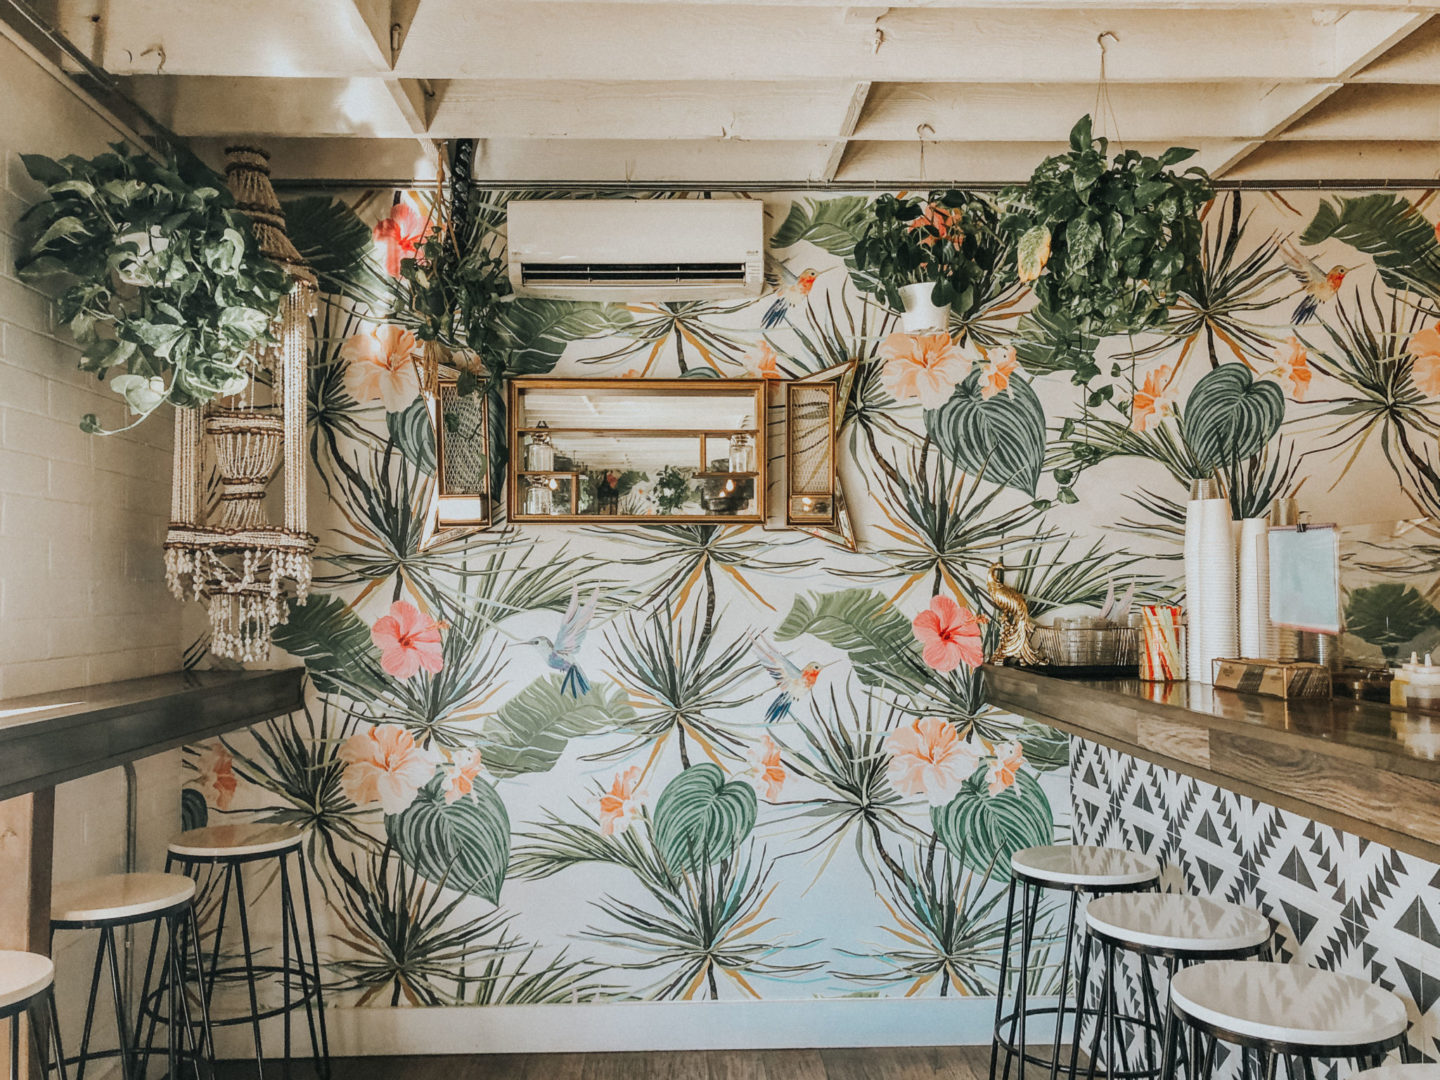 15 Most Instagrammable Coffee Shops in San Diego, CA